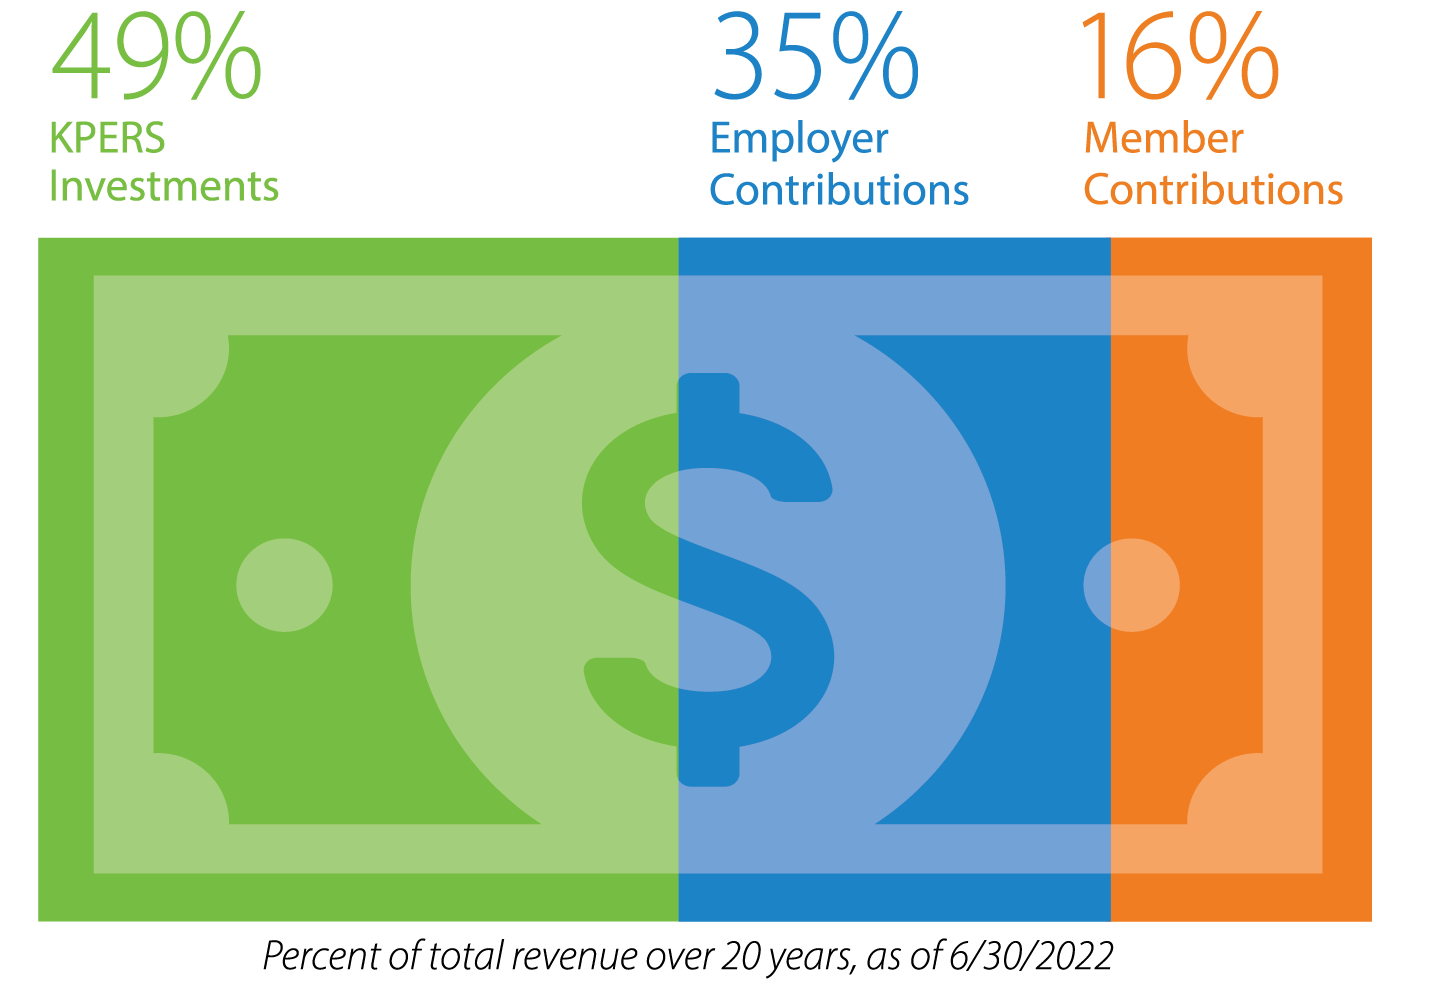 Dollar Contribution Graphic, 47% KPERS Investments, 36% Employer Contributions, 17% Member Contributions